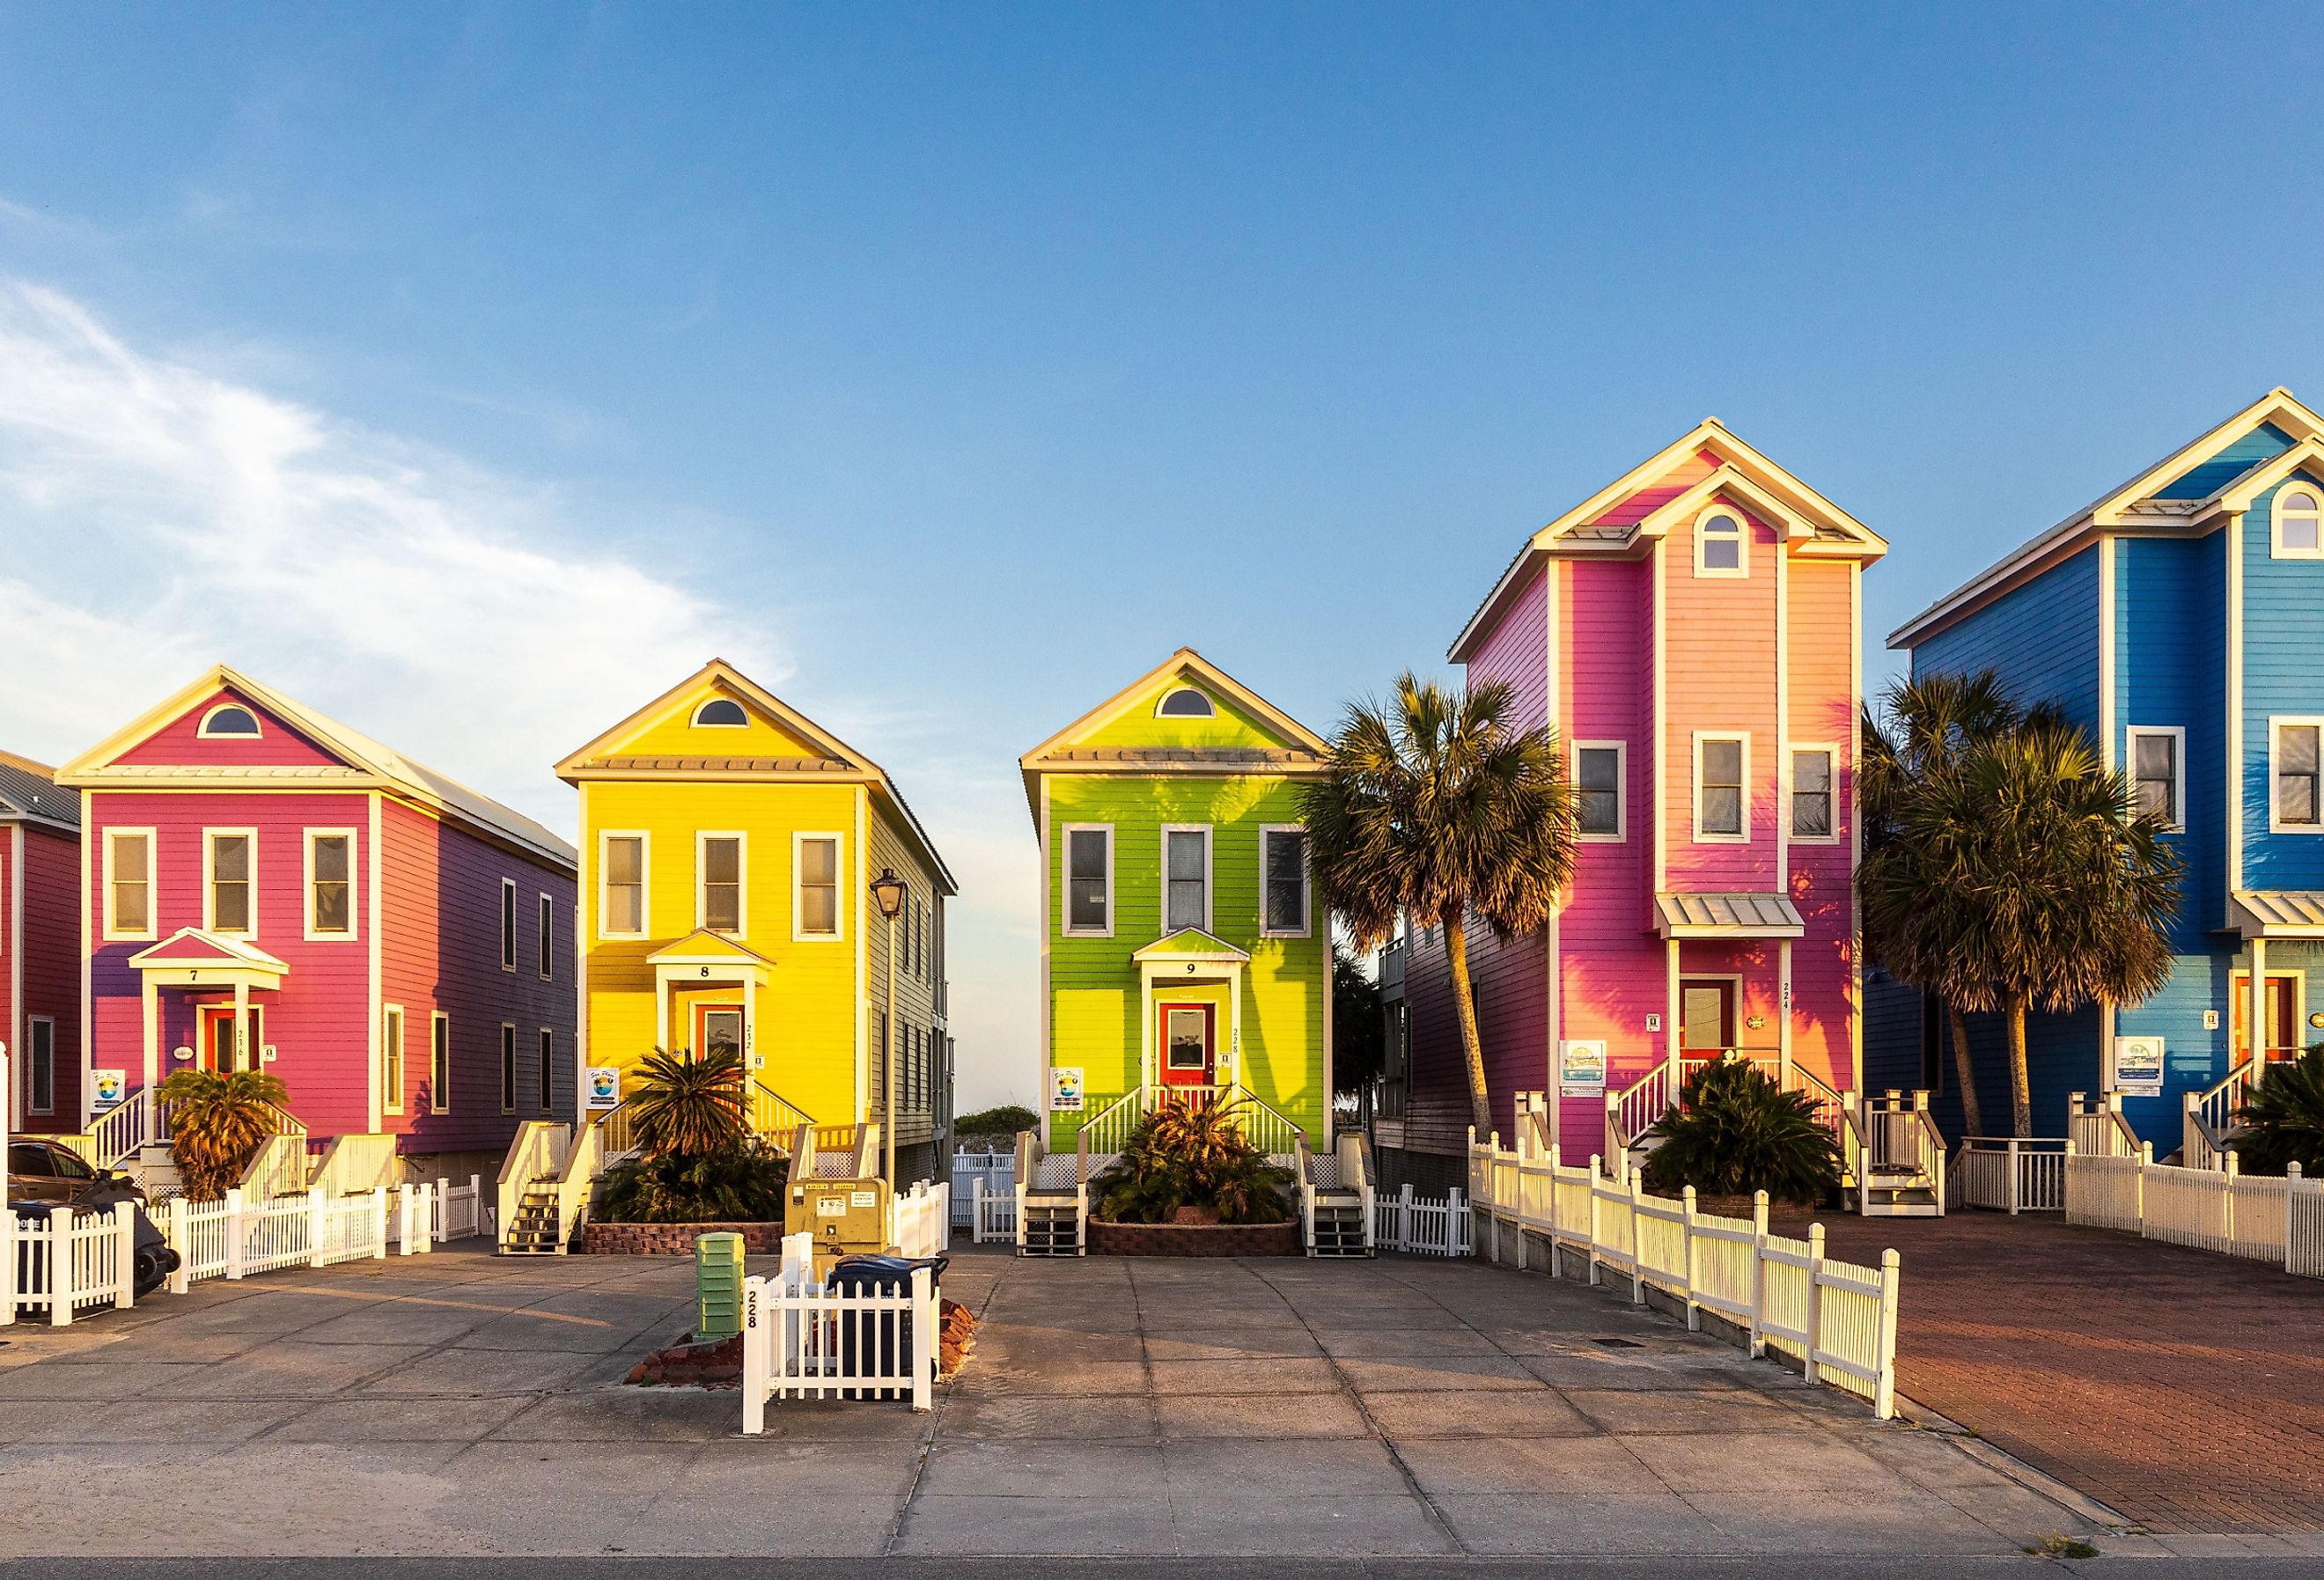 Photo of a row of colorful beachfront homes on a beautiful afternoon in St George Island, Florida. Image credit H.J. Herrera via Shutterstock.